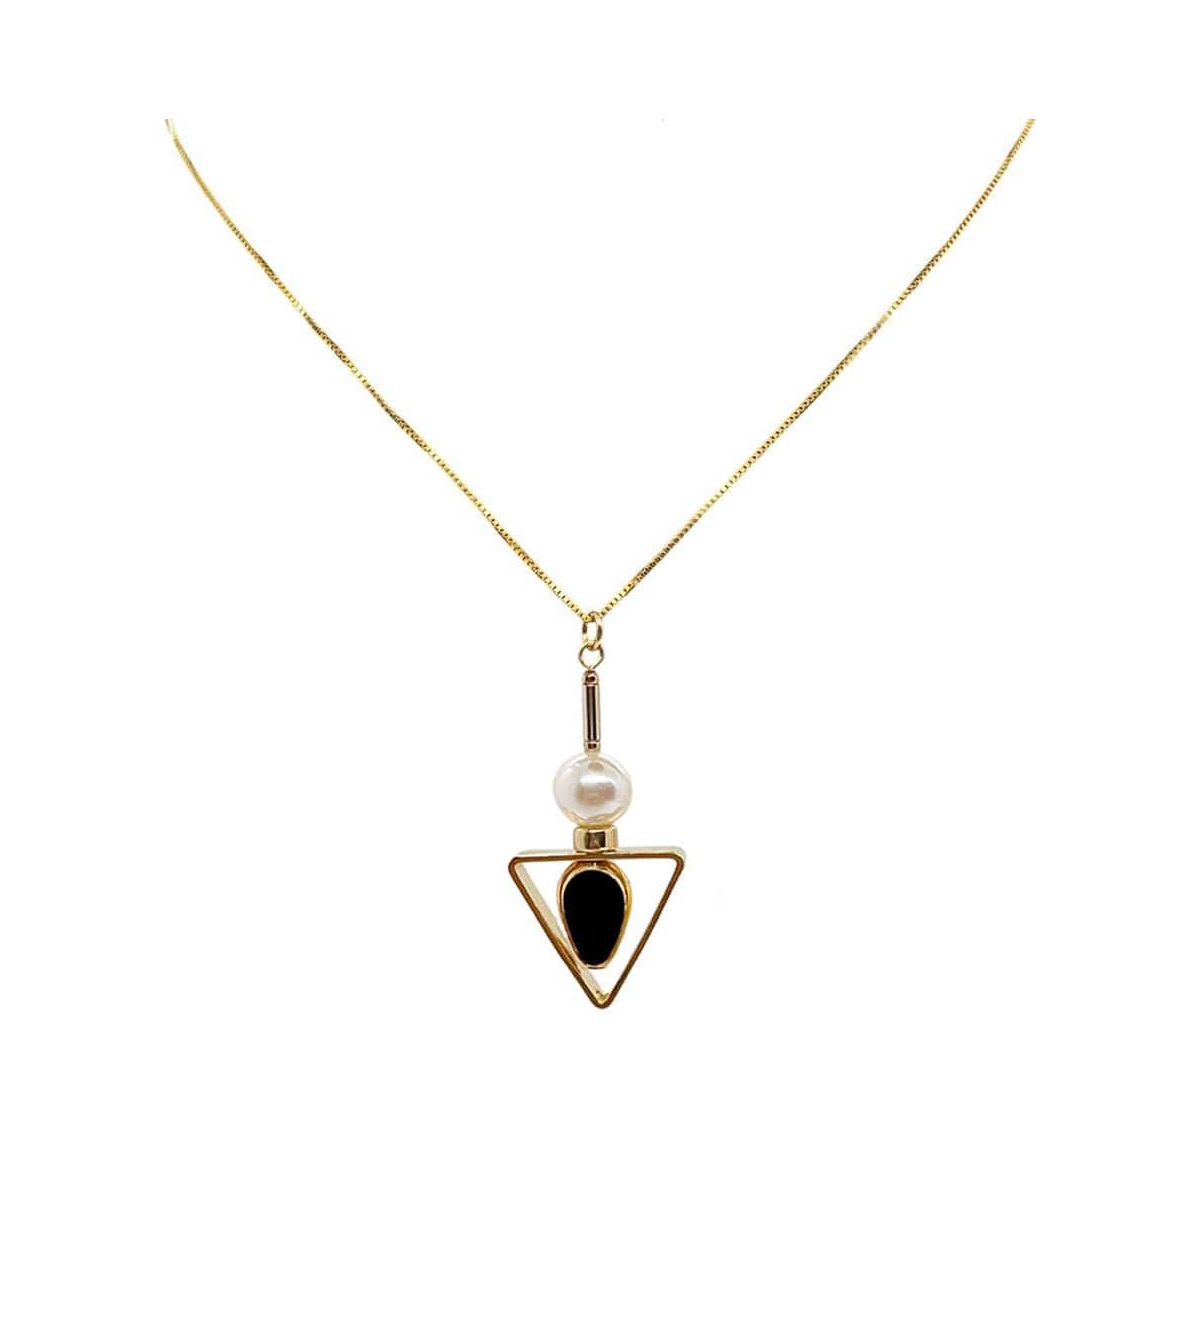 Triangle & Pearls Chain Necklace - Black, white and gold